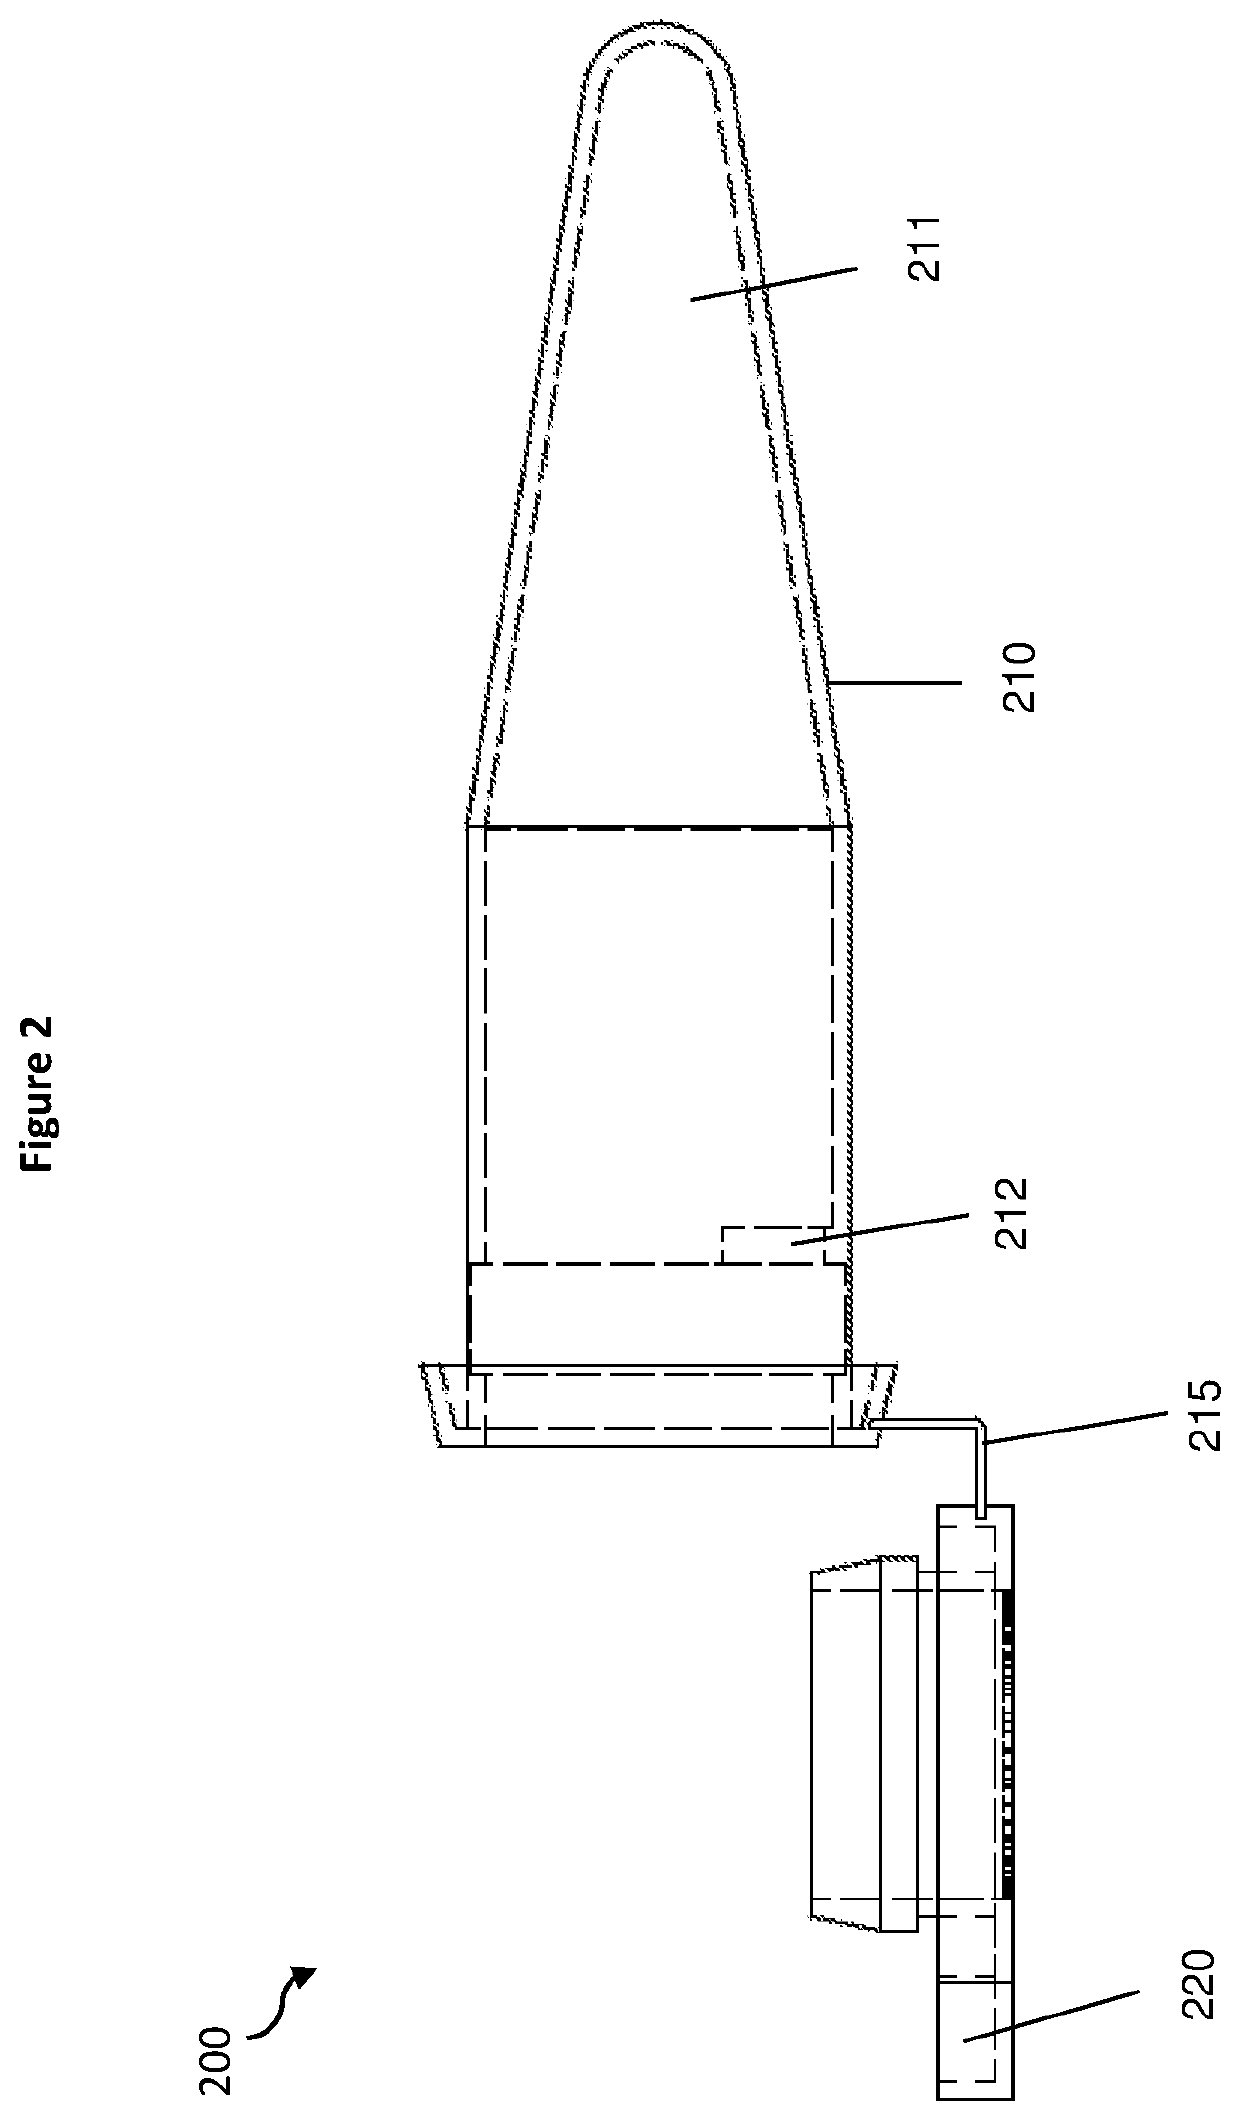 Collection and storage apparatus